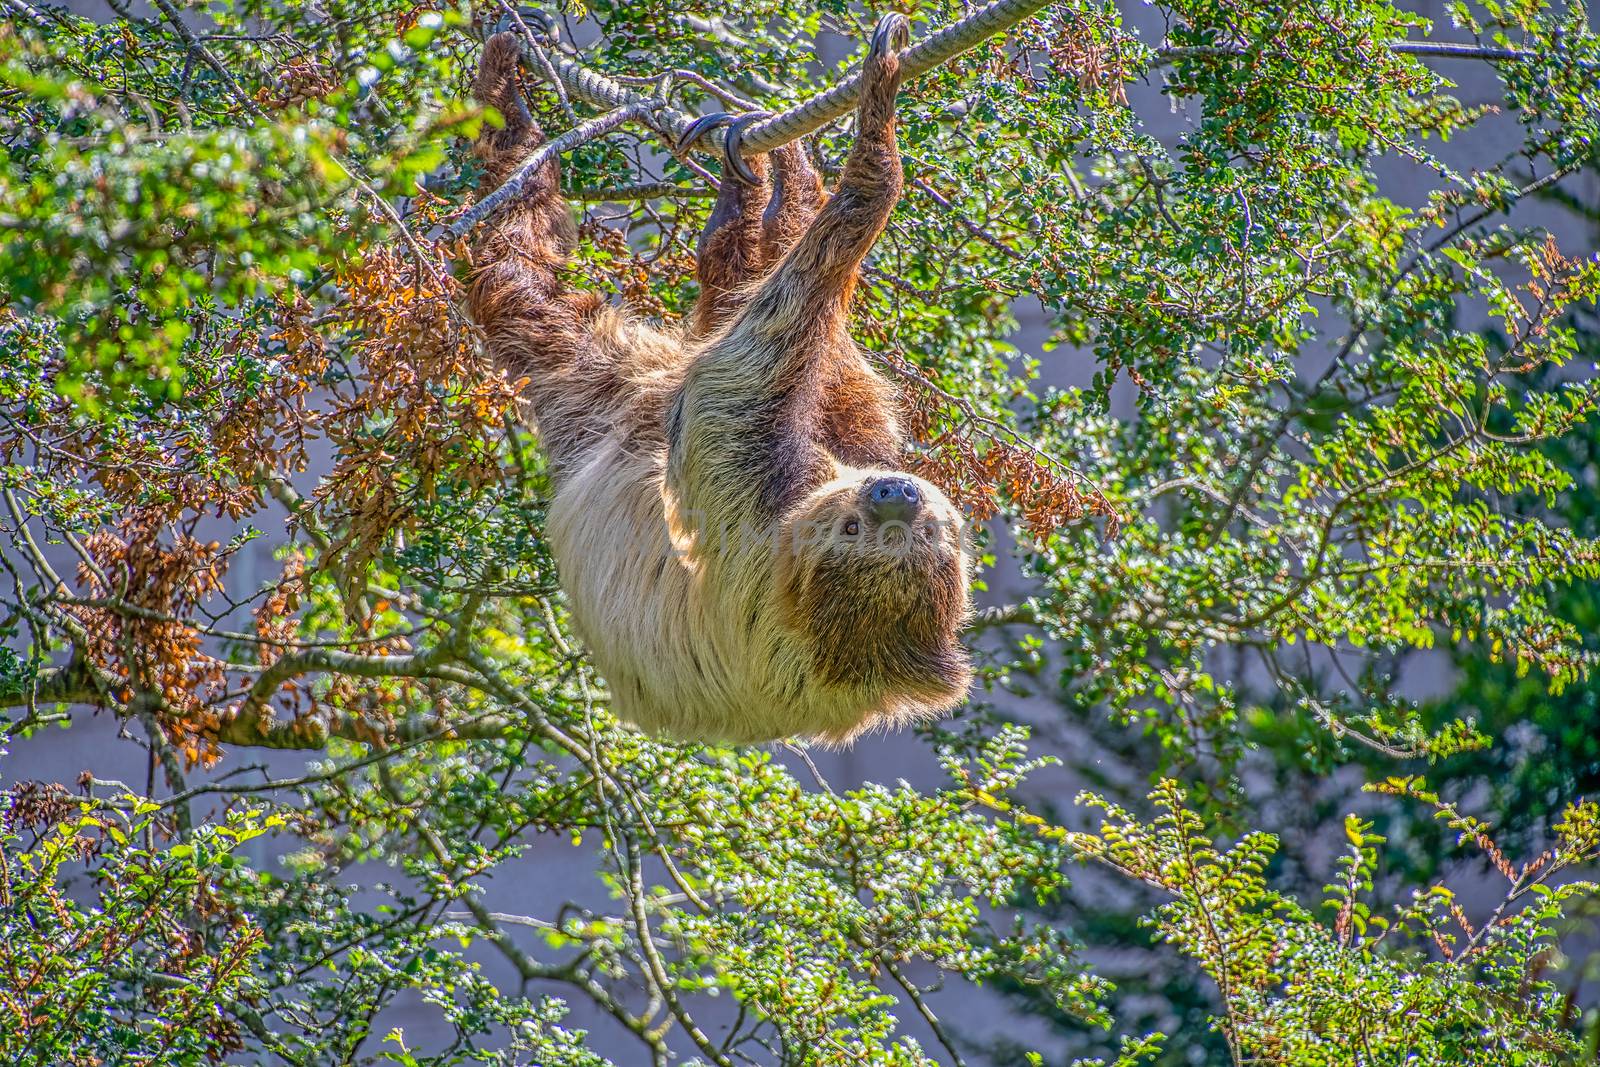 Two toed sloth by Russell102